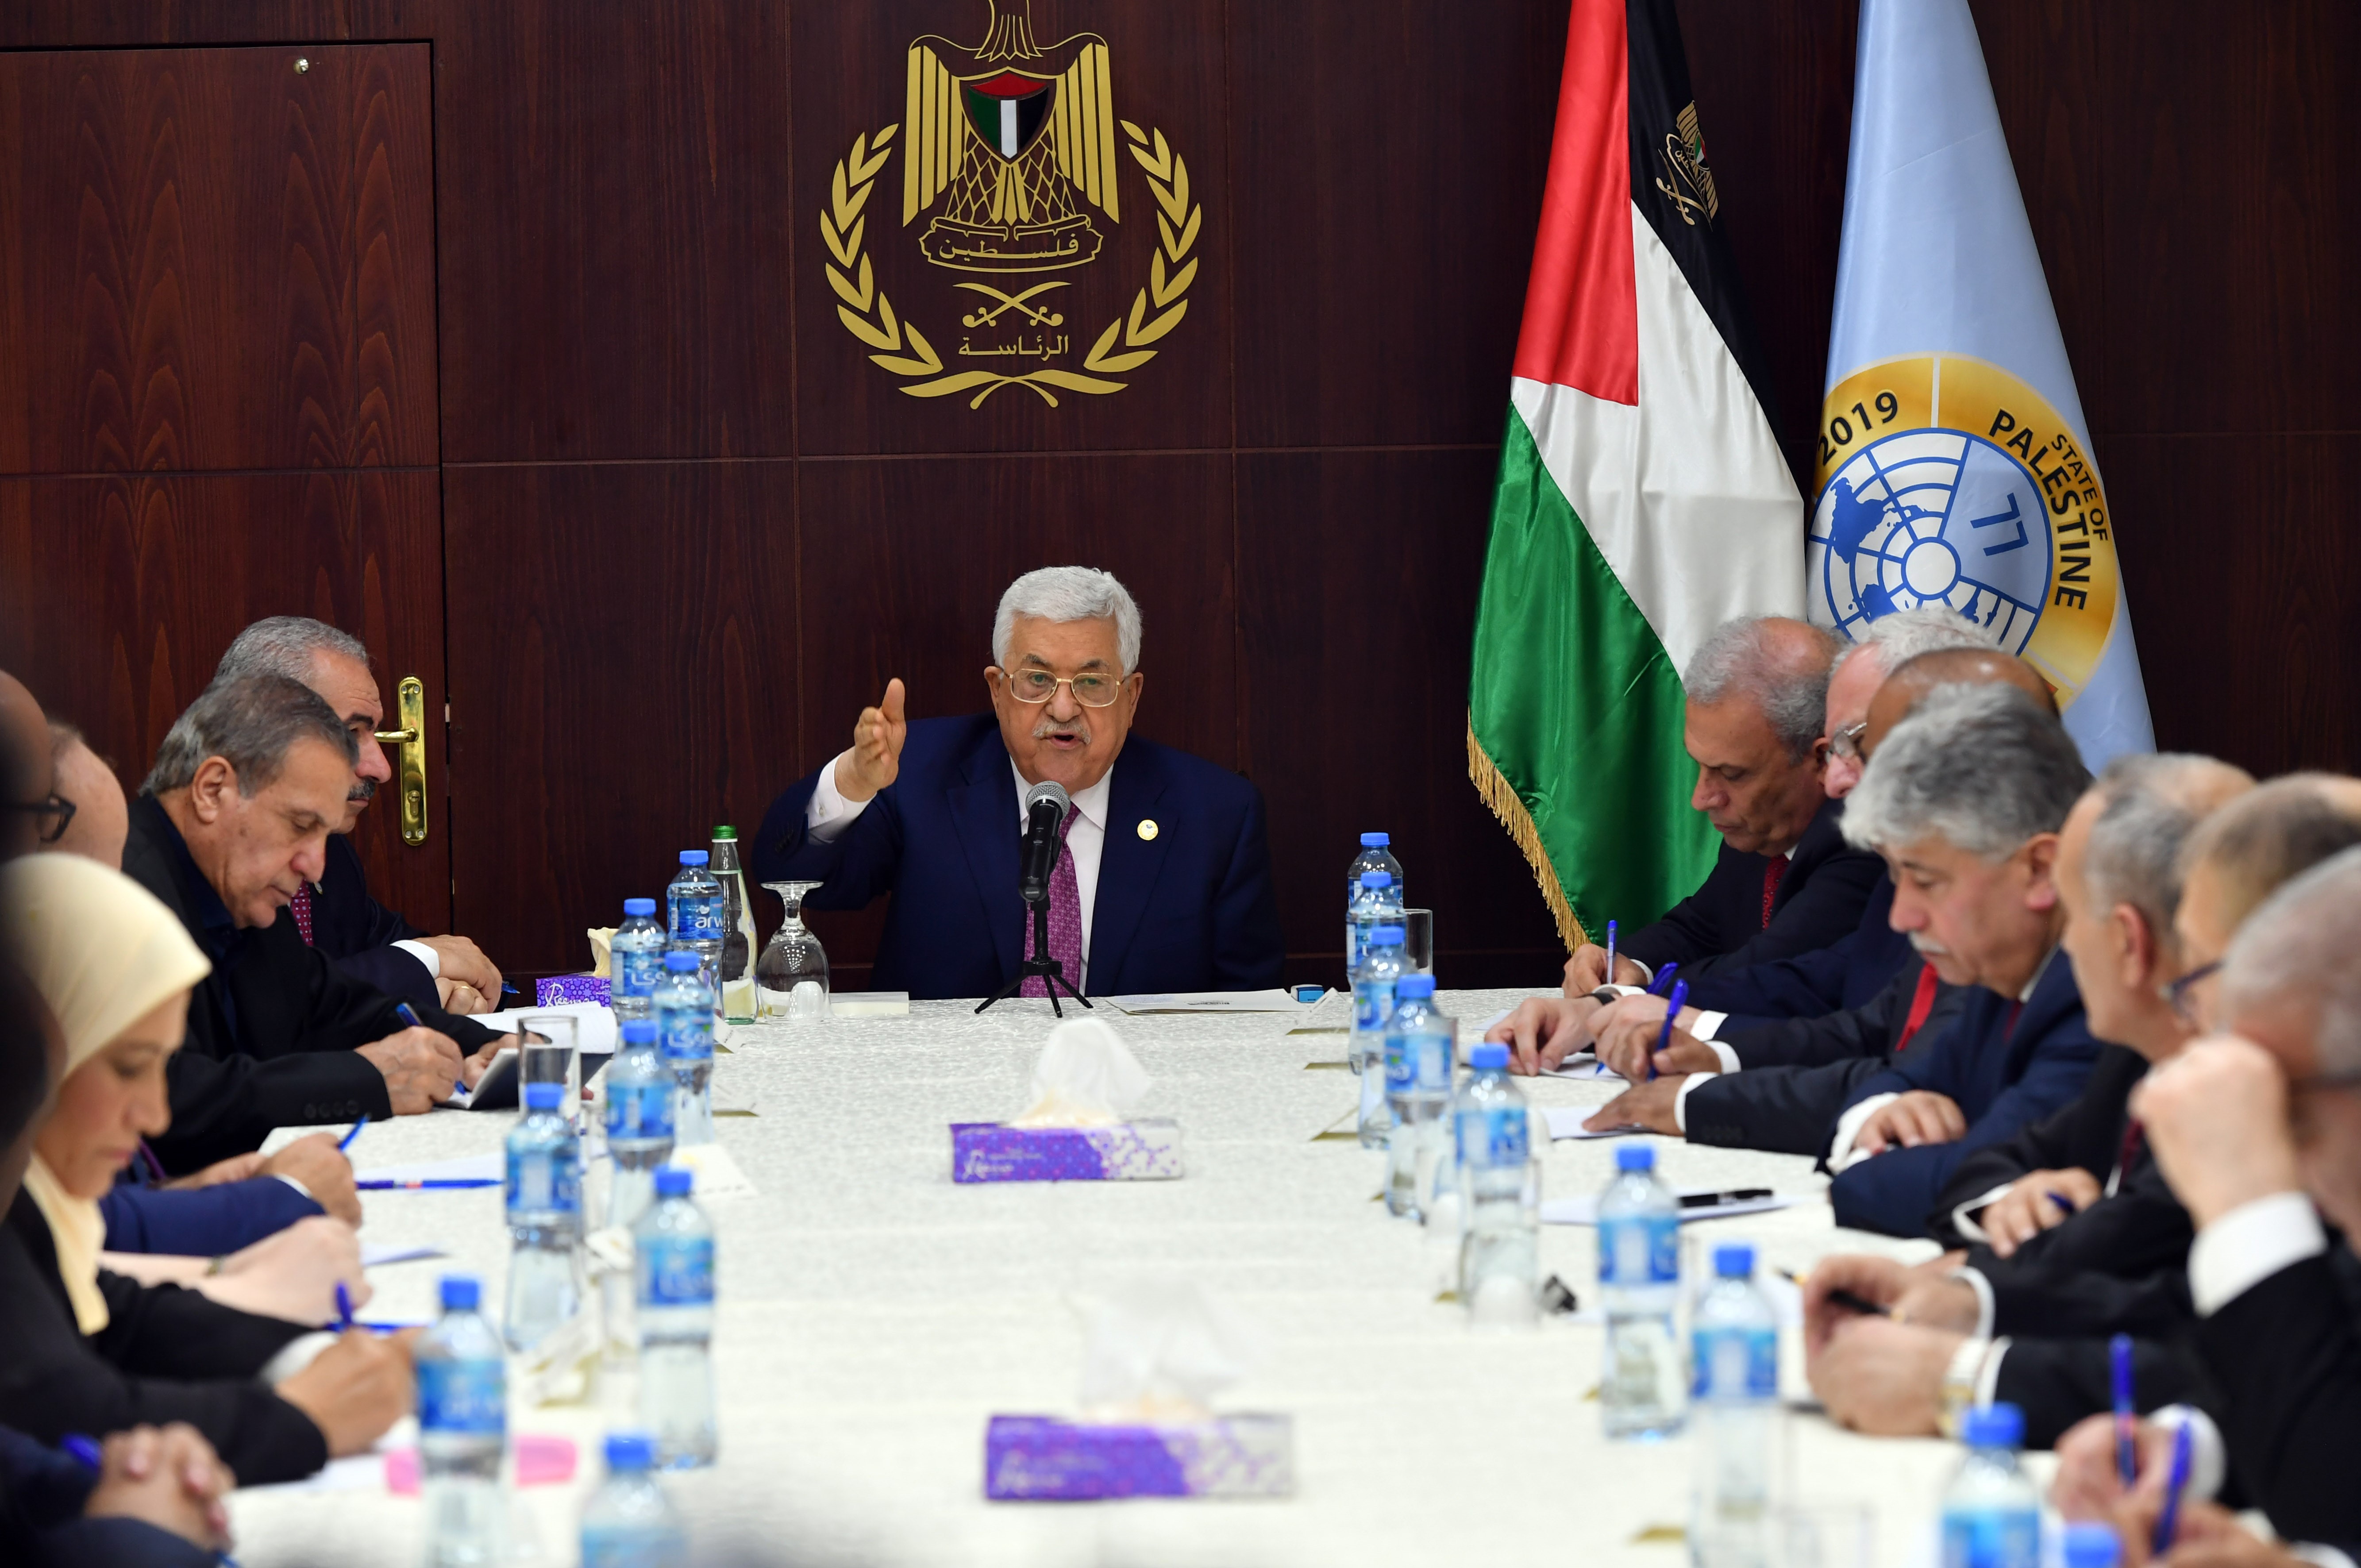 PLO Central Council to Convene Next Month to Discuss Revoking Recognition of Israel